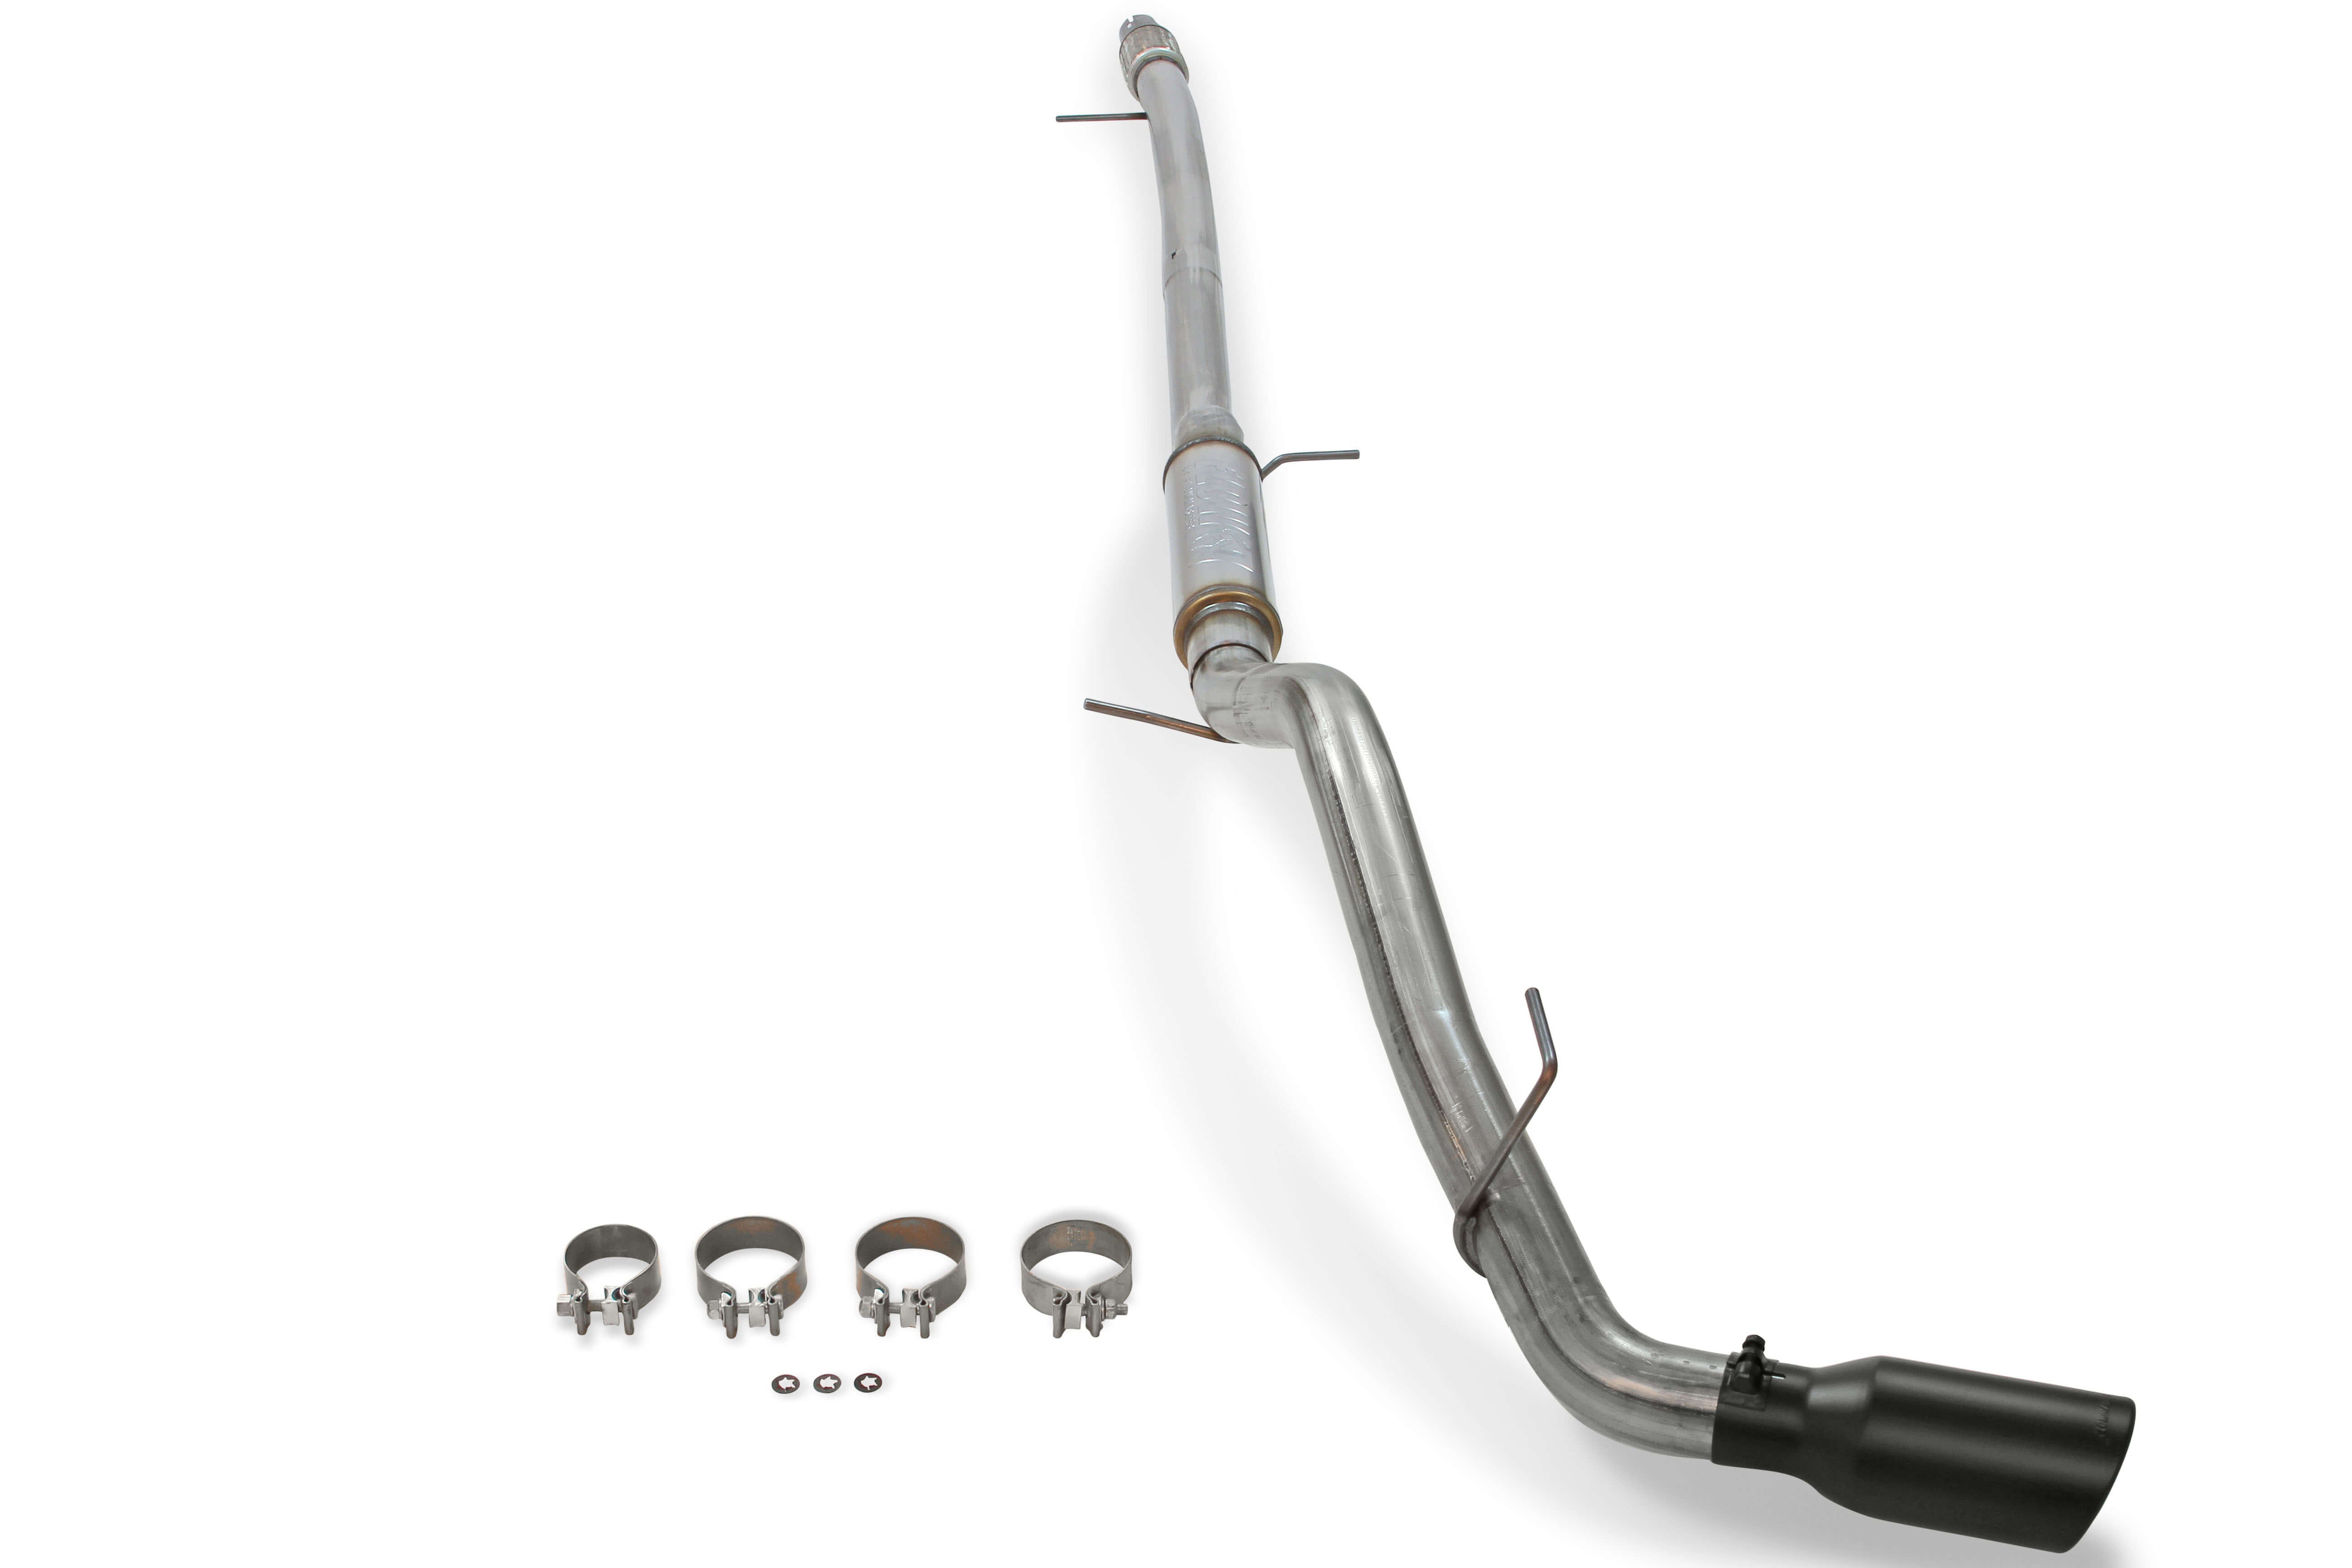 '19-23 Ford Ranger FlowFX Cat-Back Exhaust System Flowmaster parts